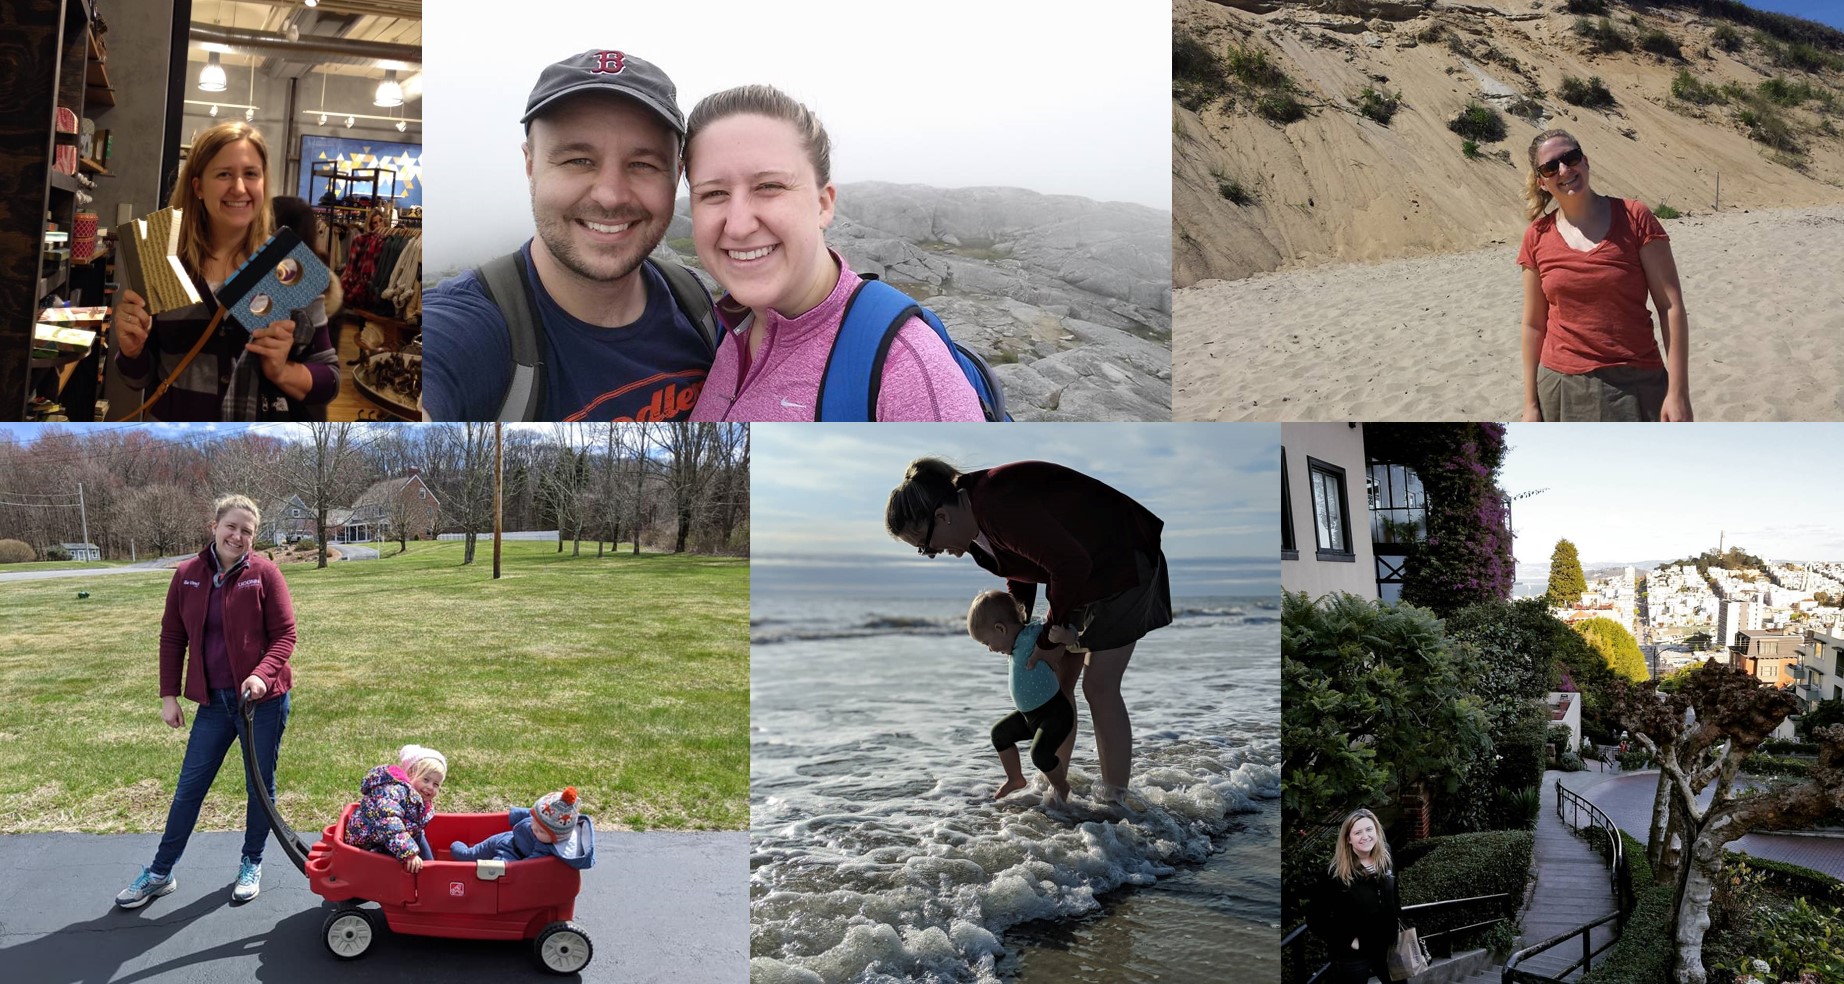 Prof. Burke hiking, visiting the ocean, exploring San Francisco, and taking a walk with her kids.